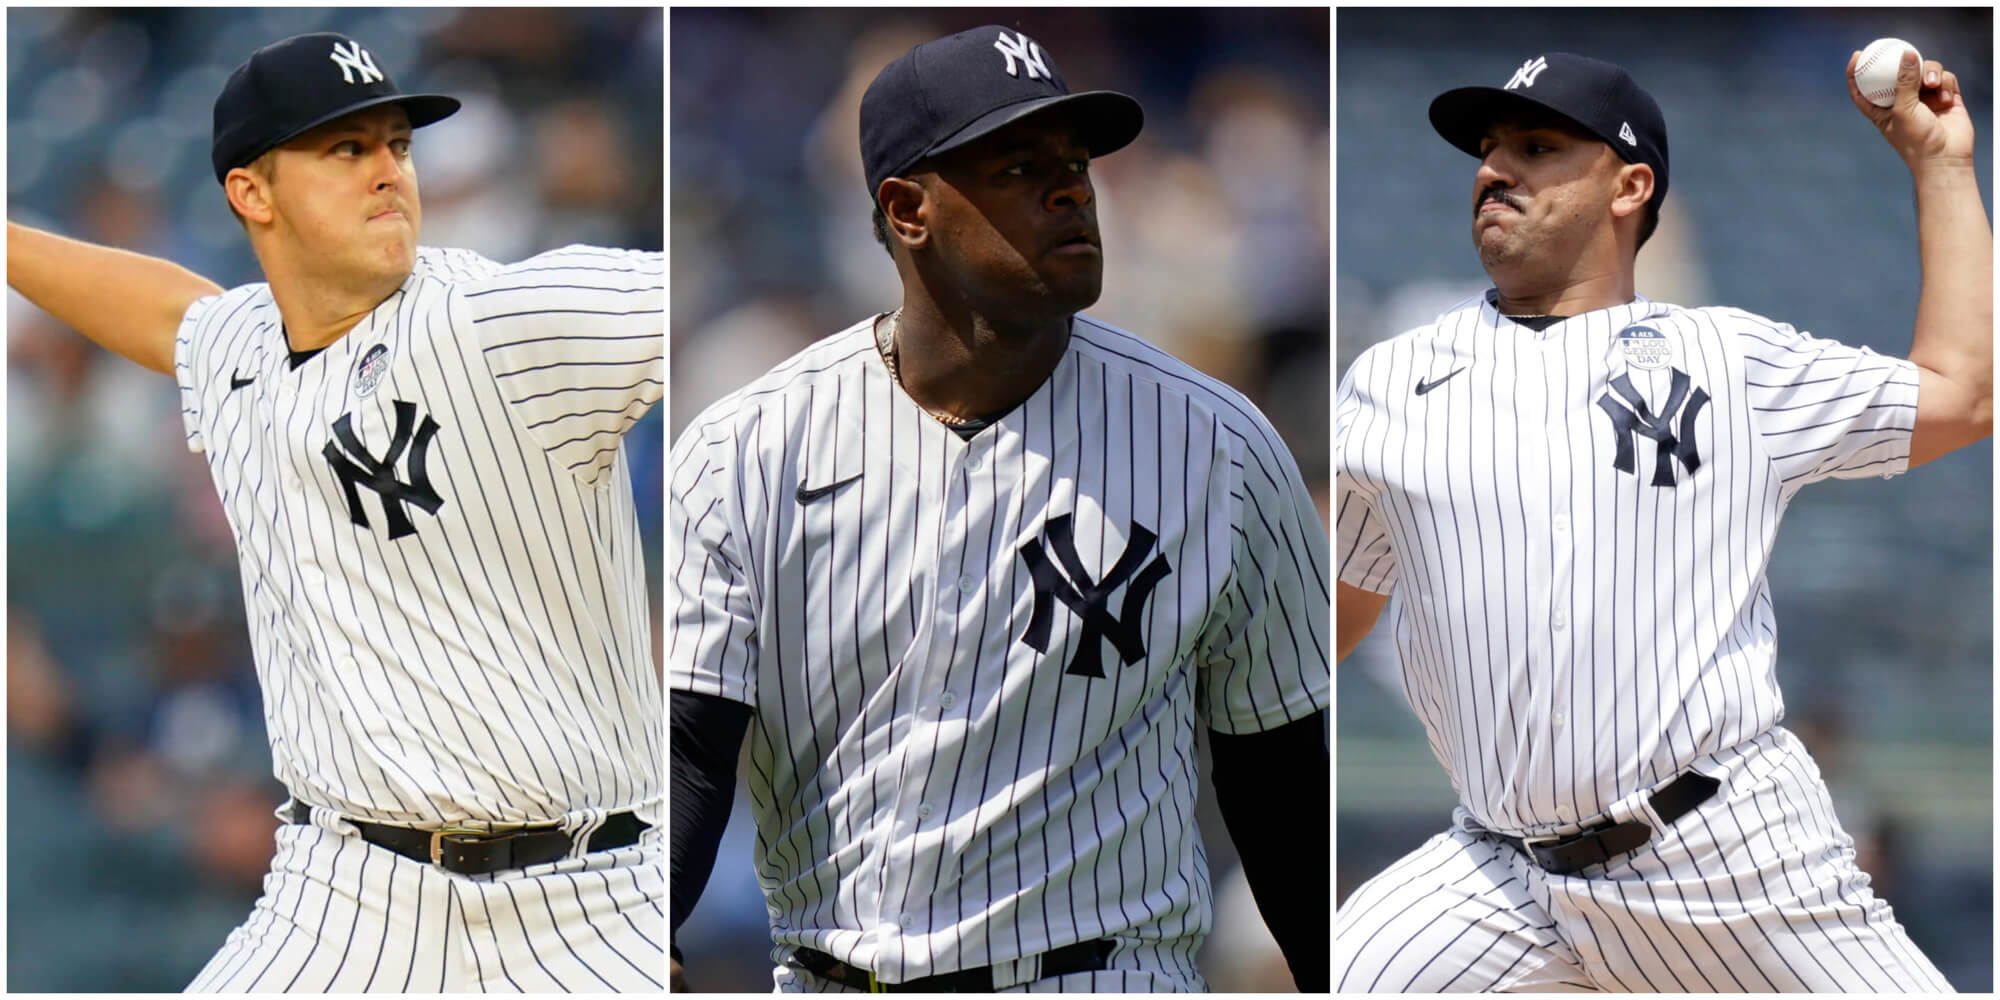 Yankees should start looking to reinforce their pitching staff